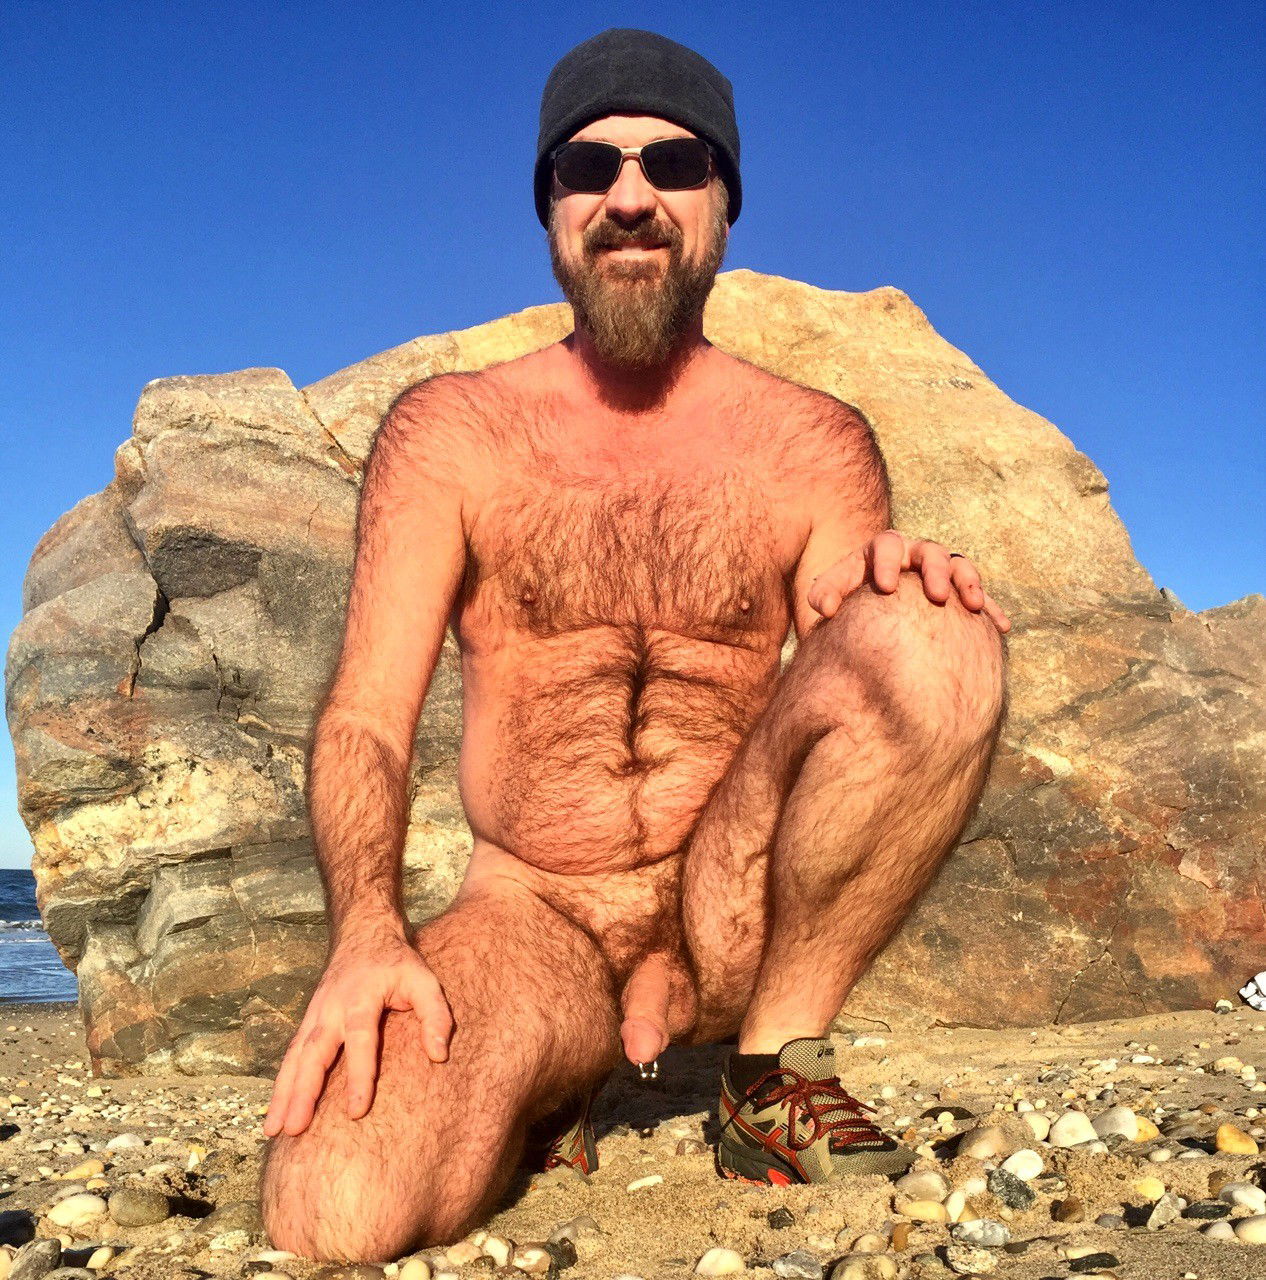 Photo by Smitty with the username @Resol702,  July 12, 2019 at 5:35 PM. The post is about the topic Gay Hairy Men